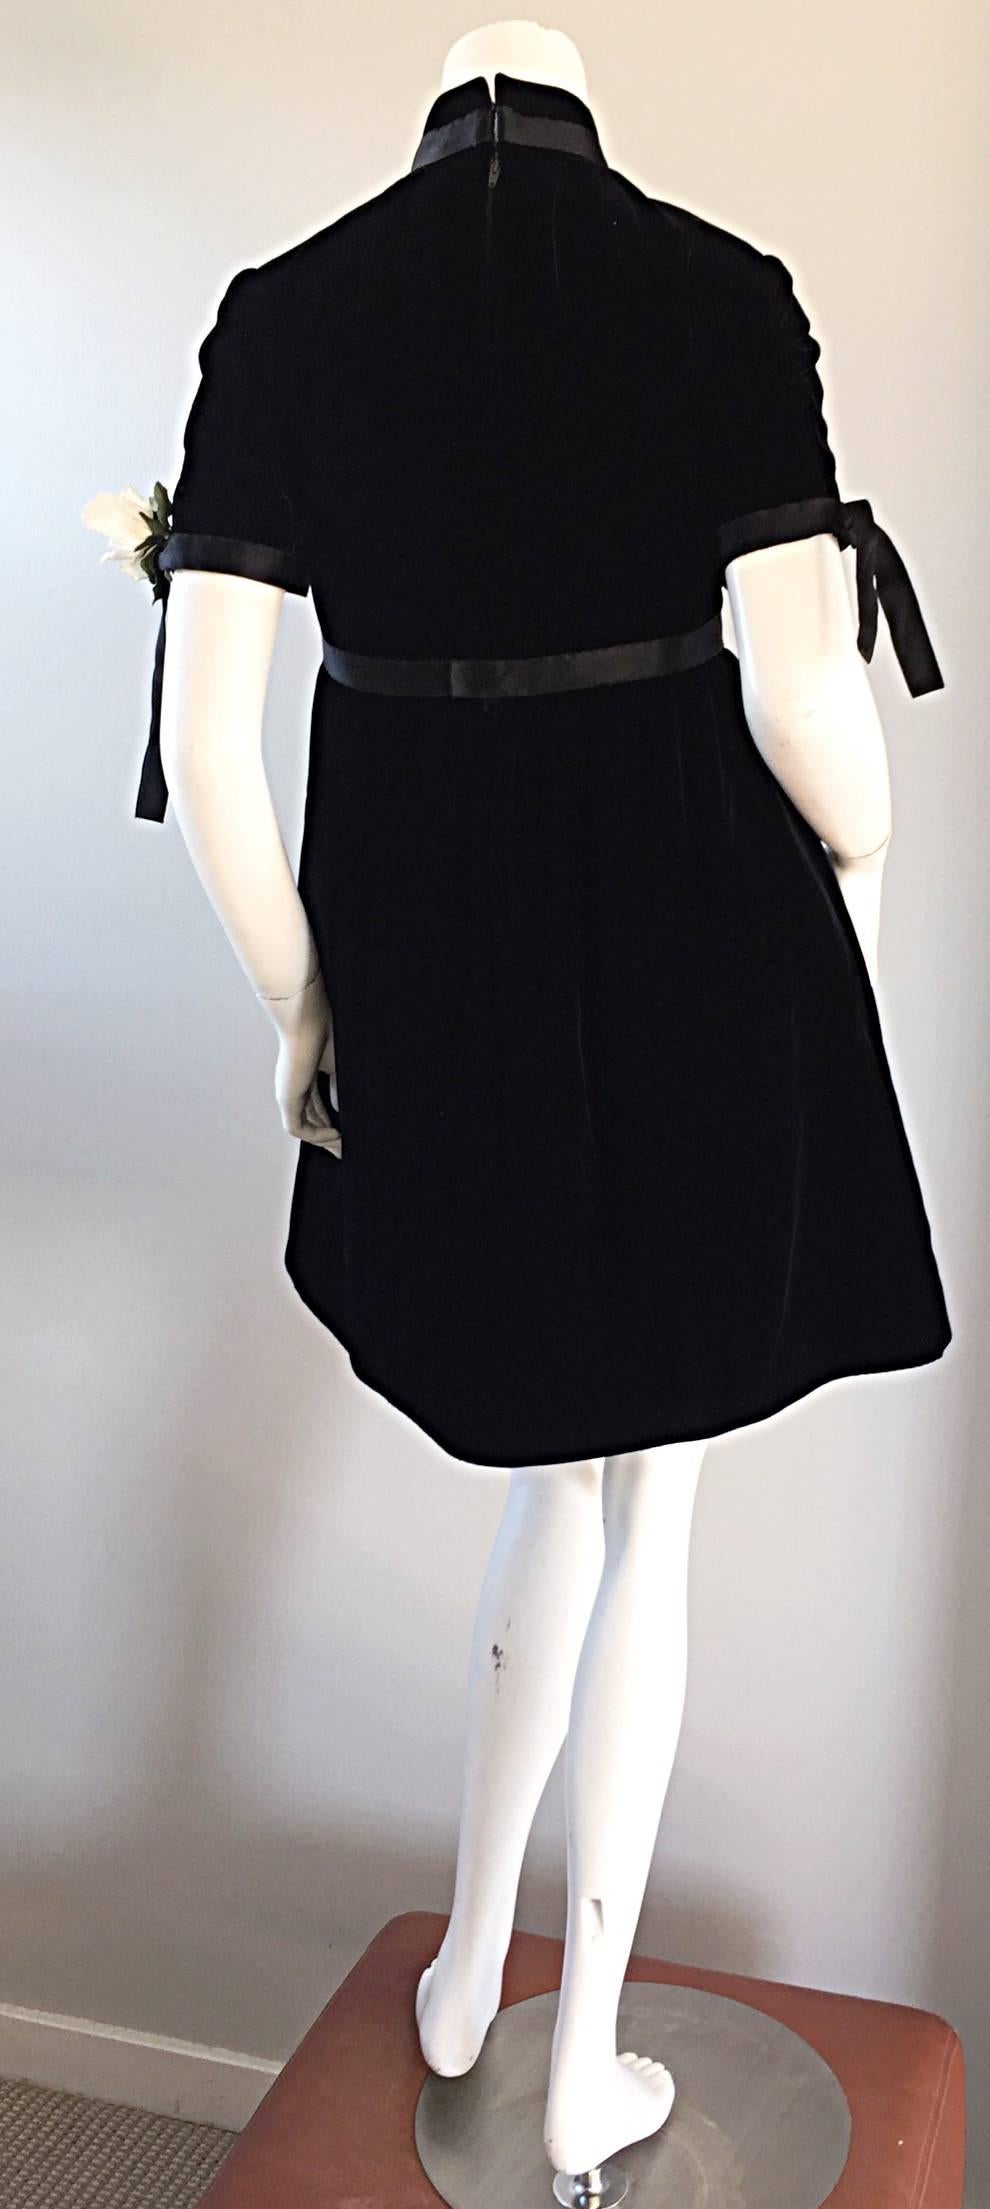 Wonderful 60s Geoffrey Beene black velvet trapeze dress, with white silk corsage at sleeve! Black silk ribbon detail at empire waist, at collar, and at each sleeve. Demi couture quality, with hand-sewn finishings. Built in interior support at waist.